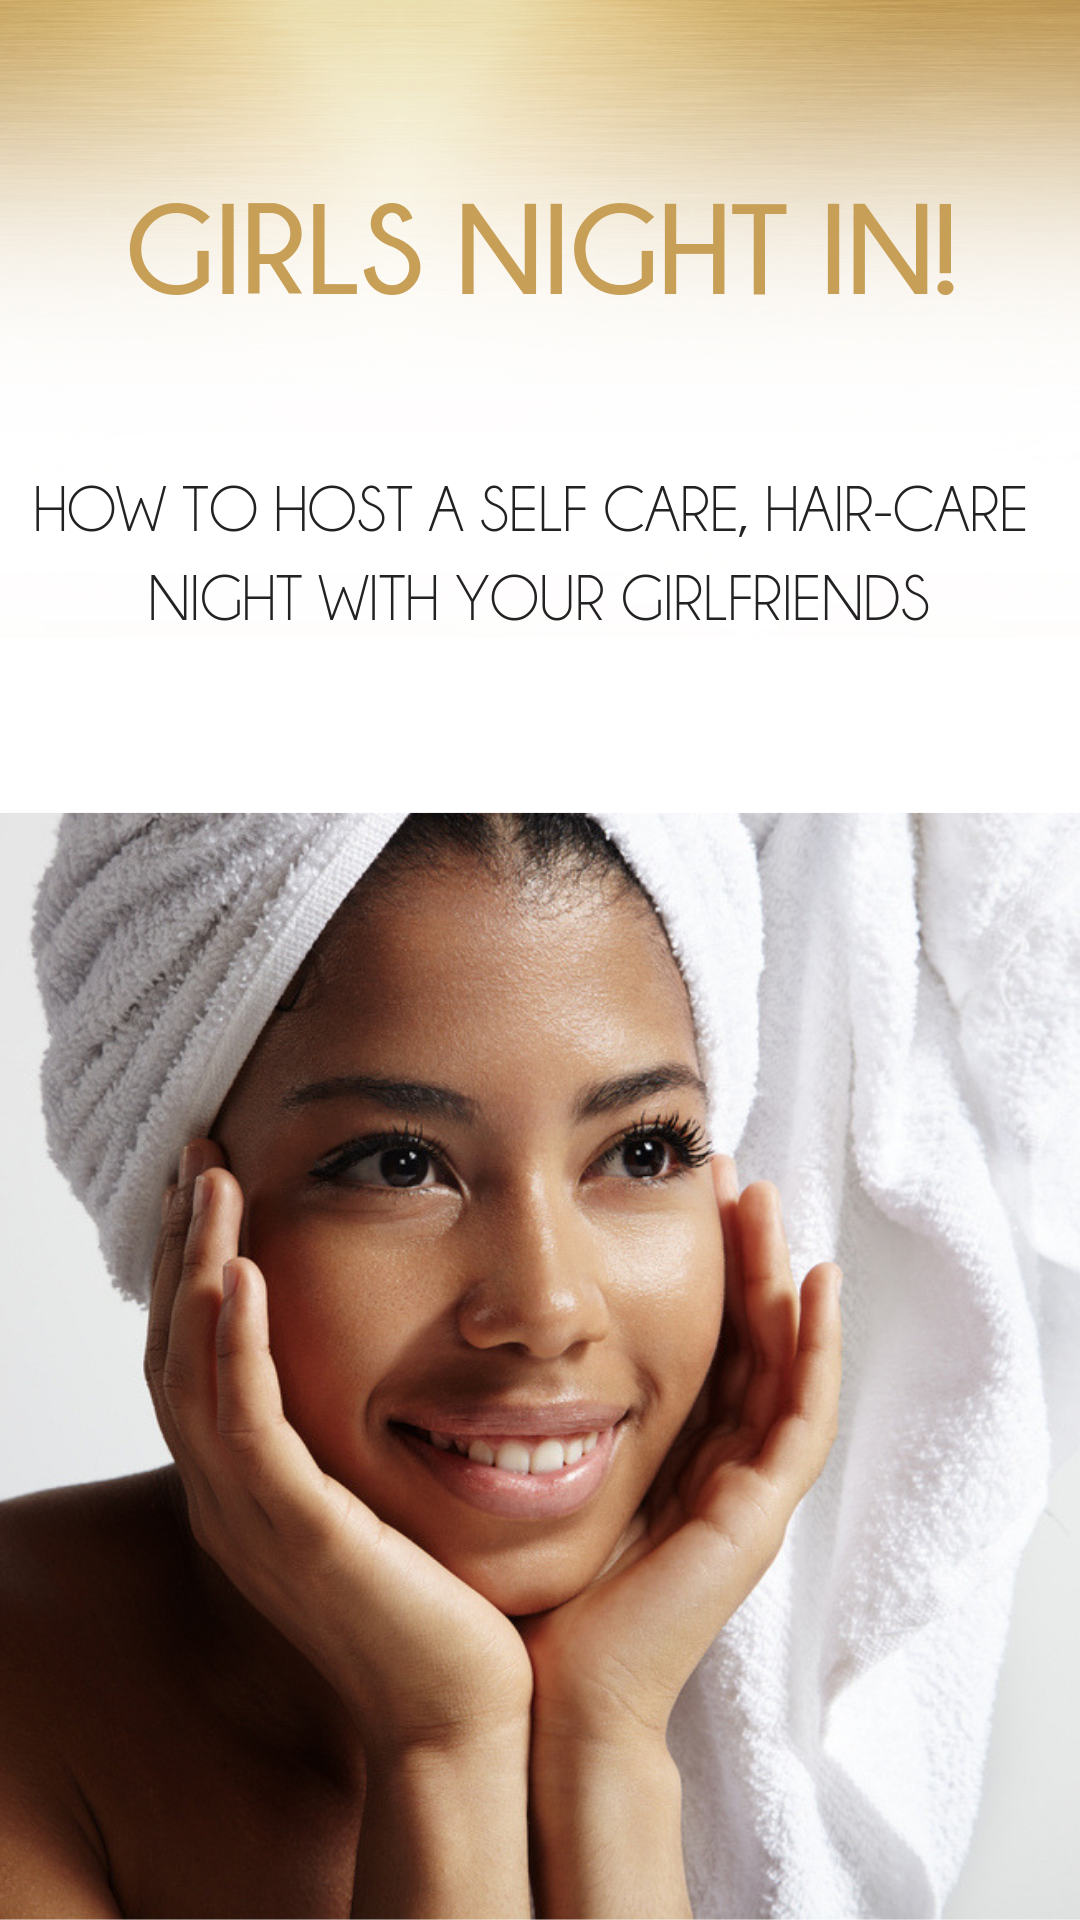 Girls Night In: How to Host a Self-Care, Hair-Care Night